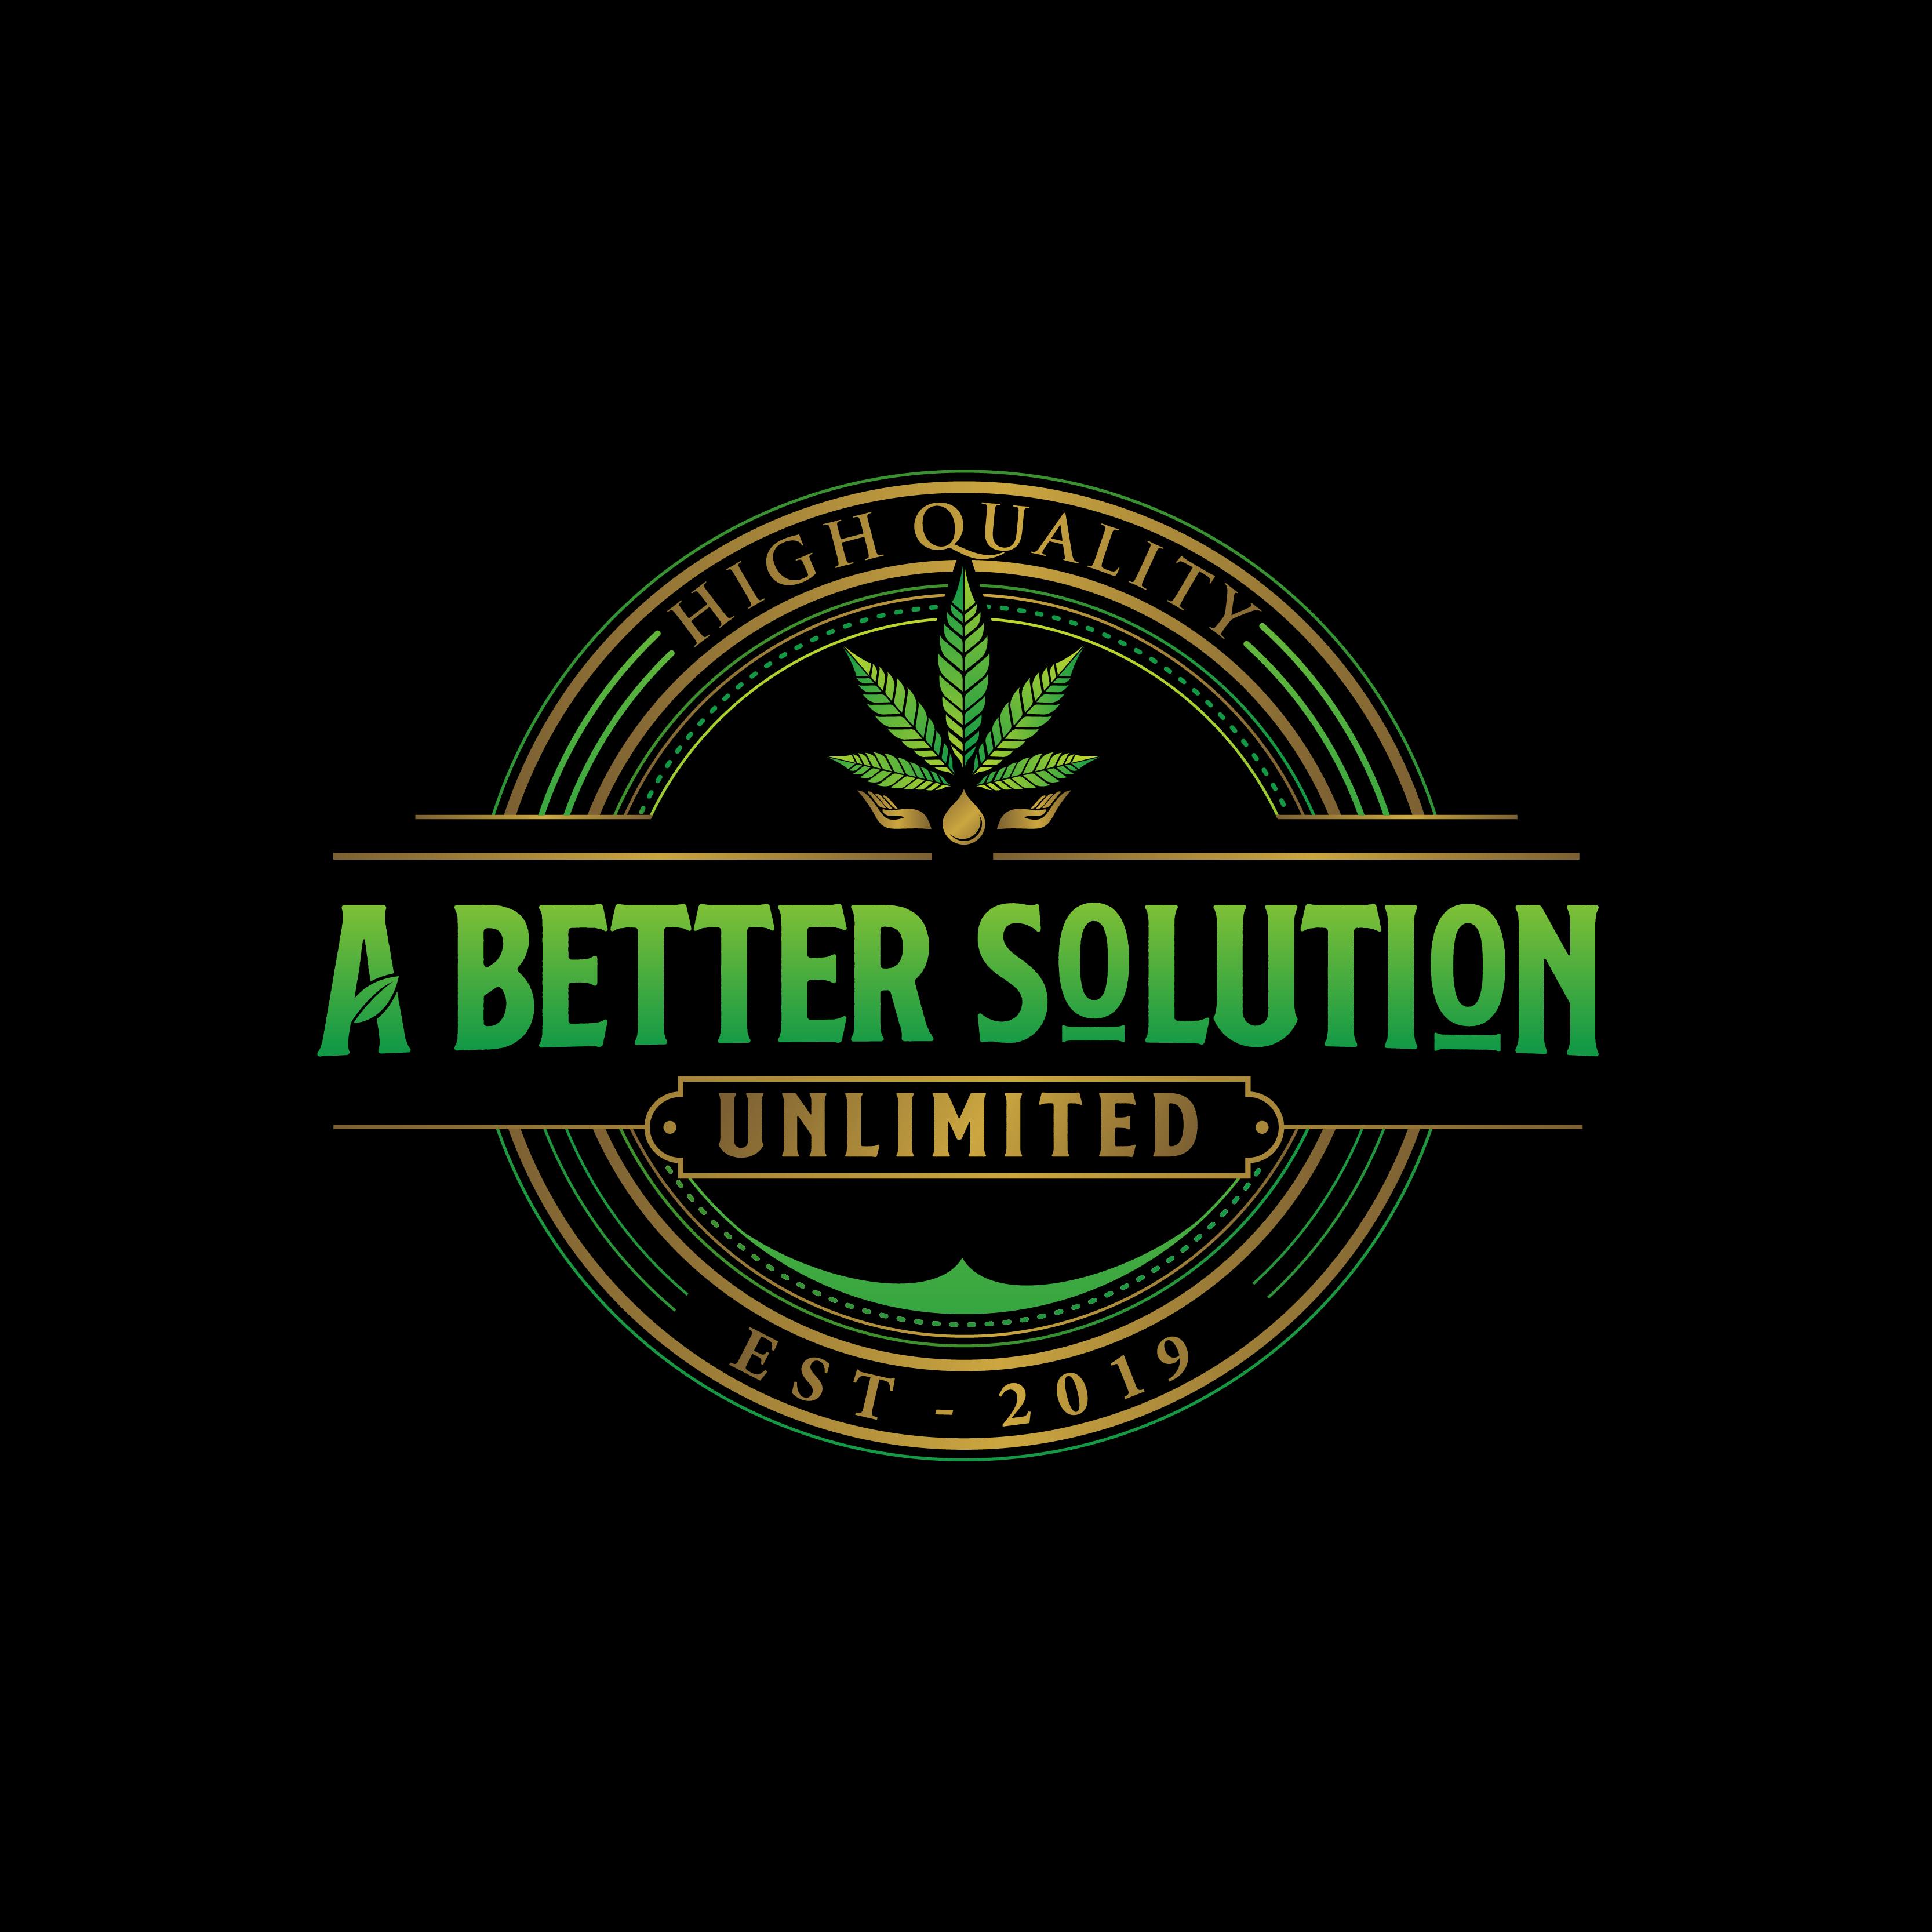 A Better Solution Unlimited logo